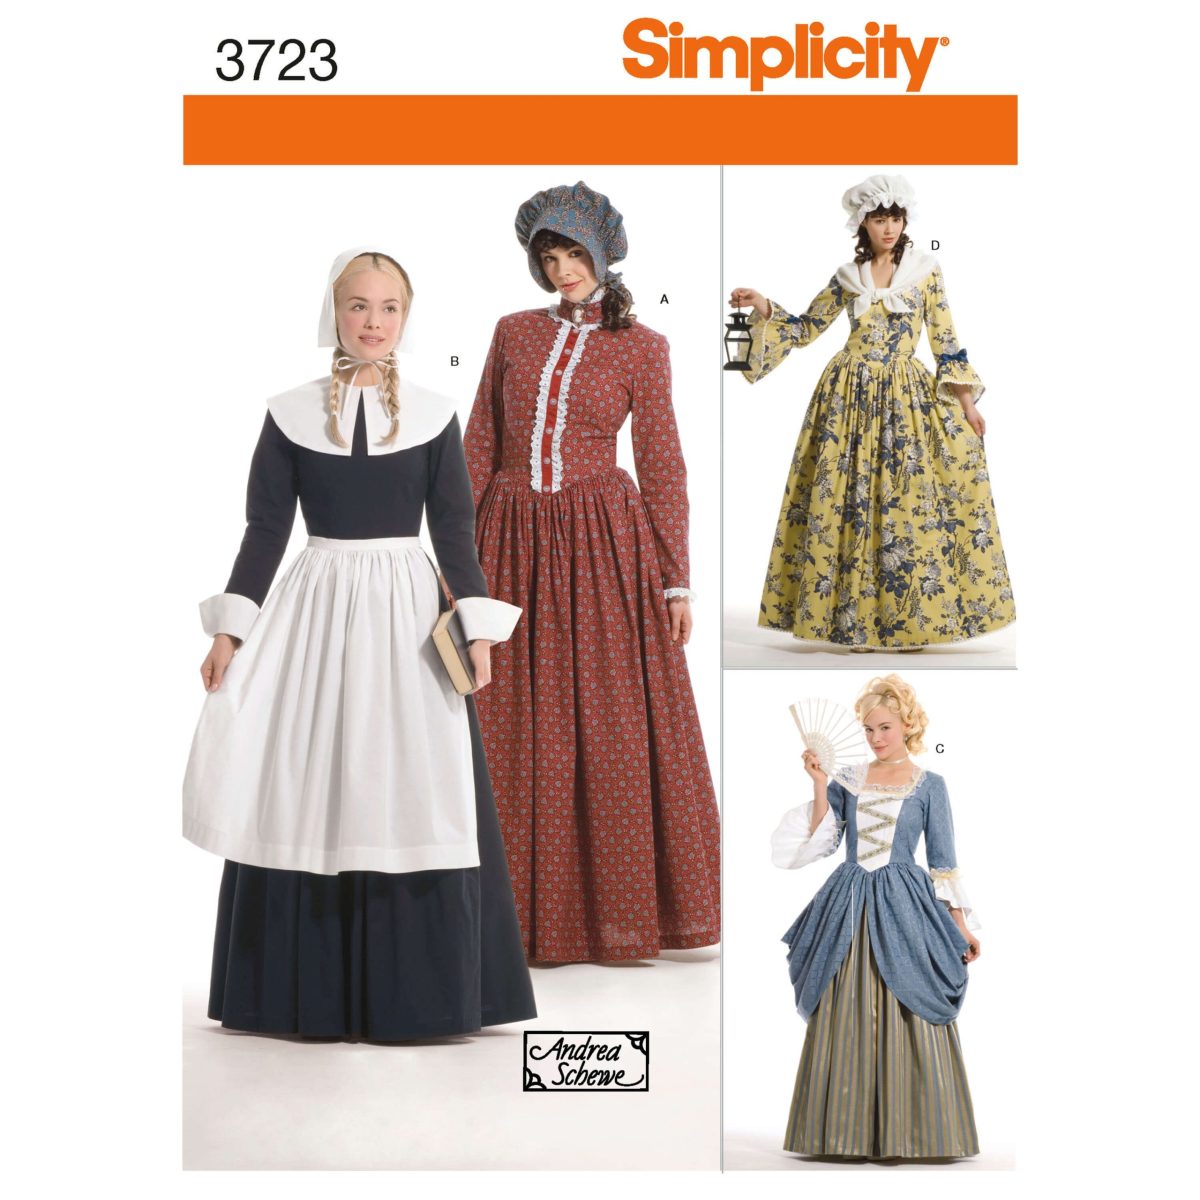 Simplicity Sewing Pattern 3723 Misses' Costumes